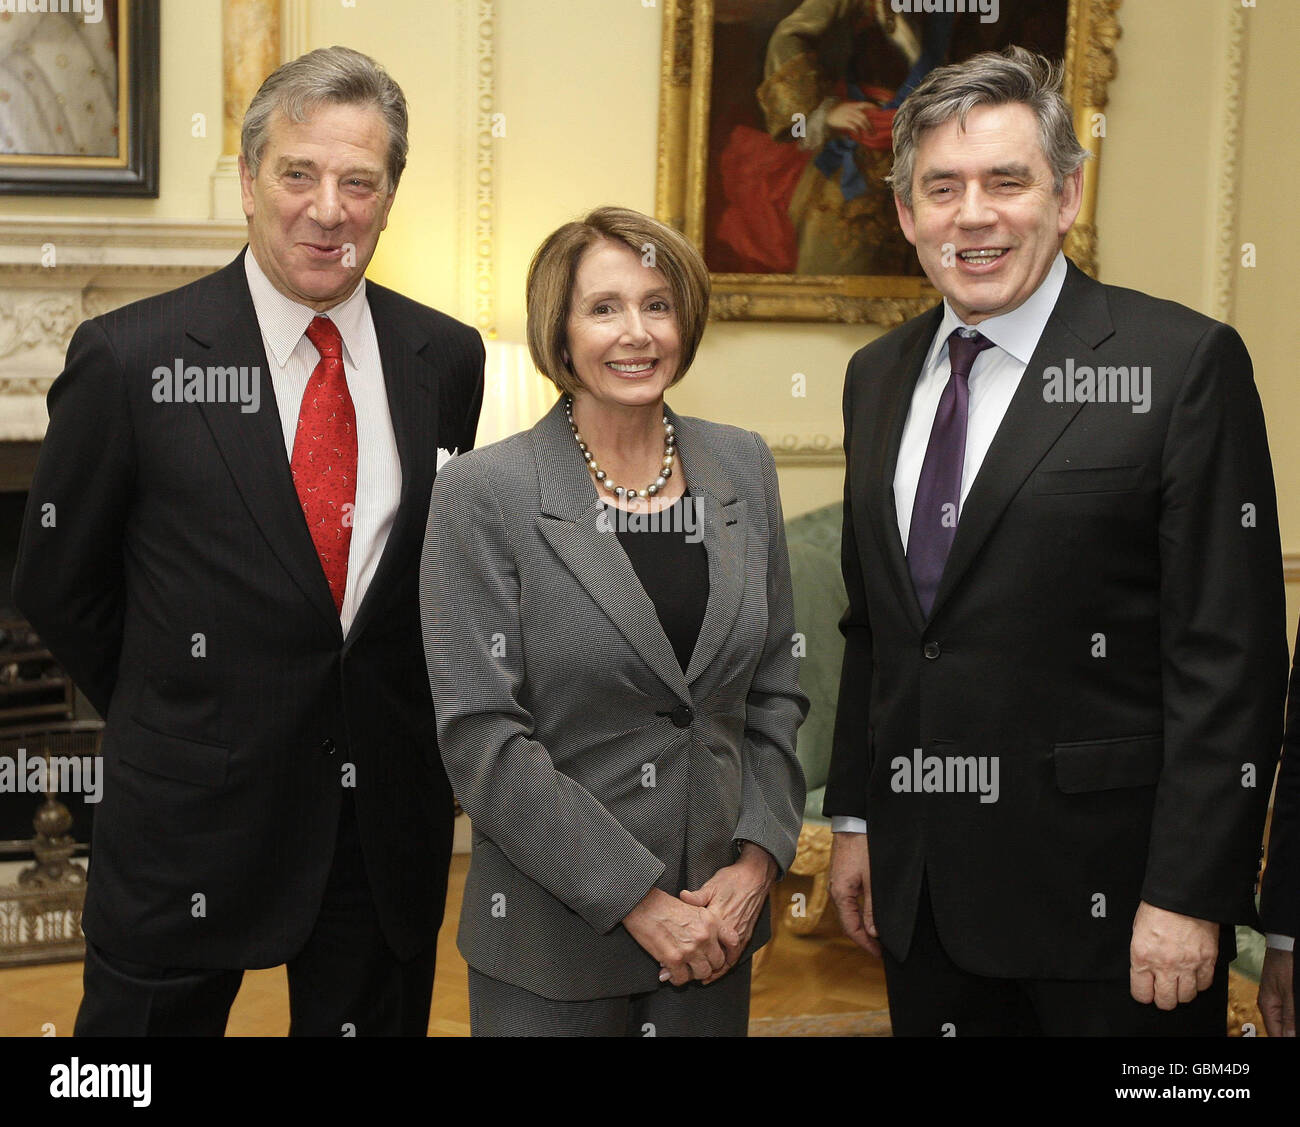 Britain's Prime Minister Gordon Brown meets with Nancy Pelosi, Speaker of the US House of Representatives, and her husband Paul Pelosi (left) in 10 Downing Street in London. Stock Photo